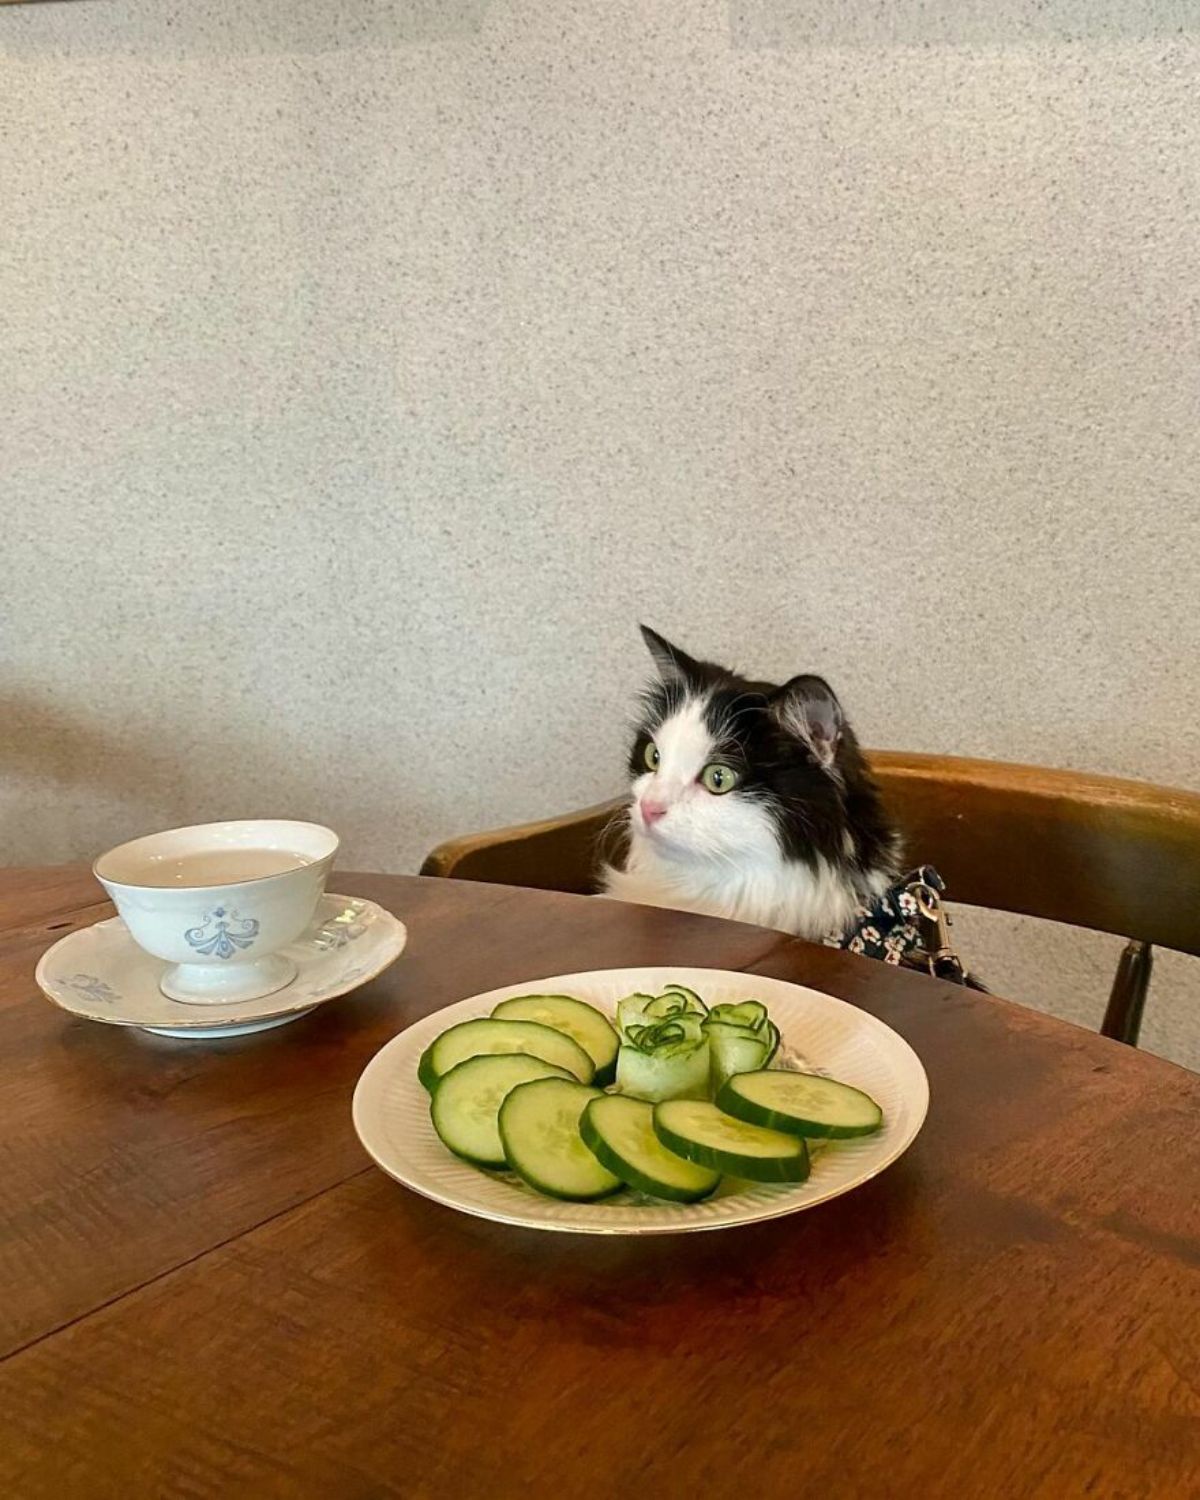 black and white fluffy cat sitting on a chair at a table with a plate of cucumber slicers and a white and blue bowl on a white and blue saucer